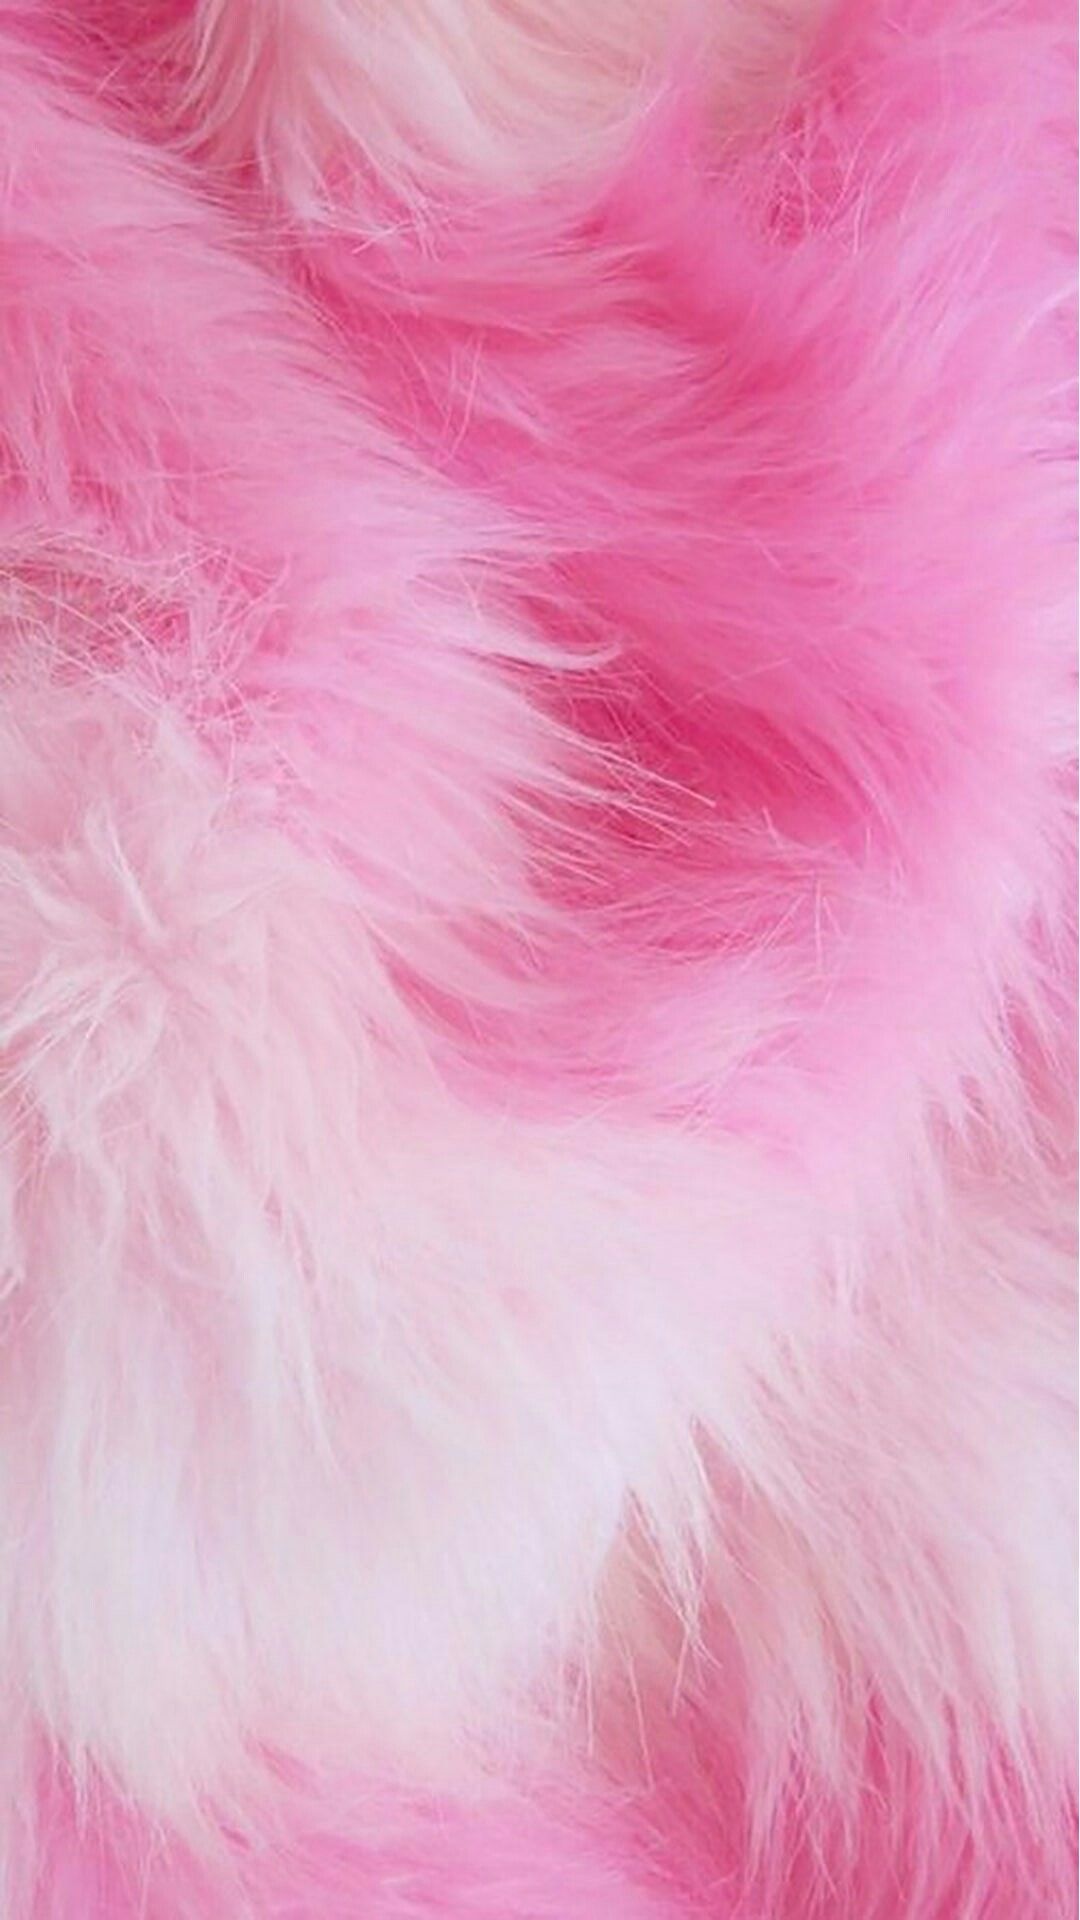 White furry wallpapers, Popular designs, Soft and cozy, Fuzzy texture, 1080x1920 Full HD Handy